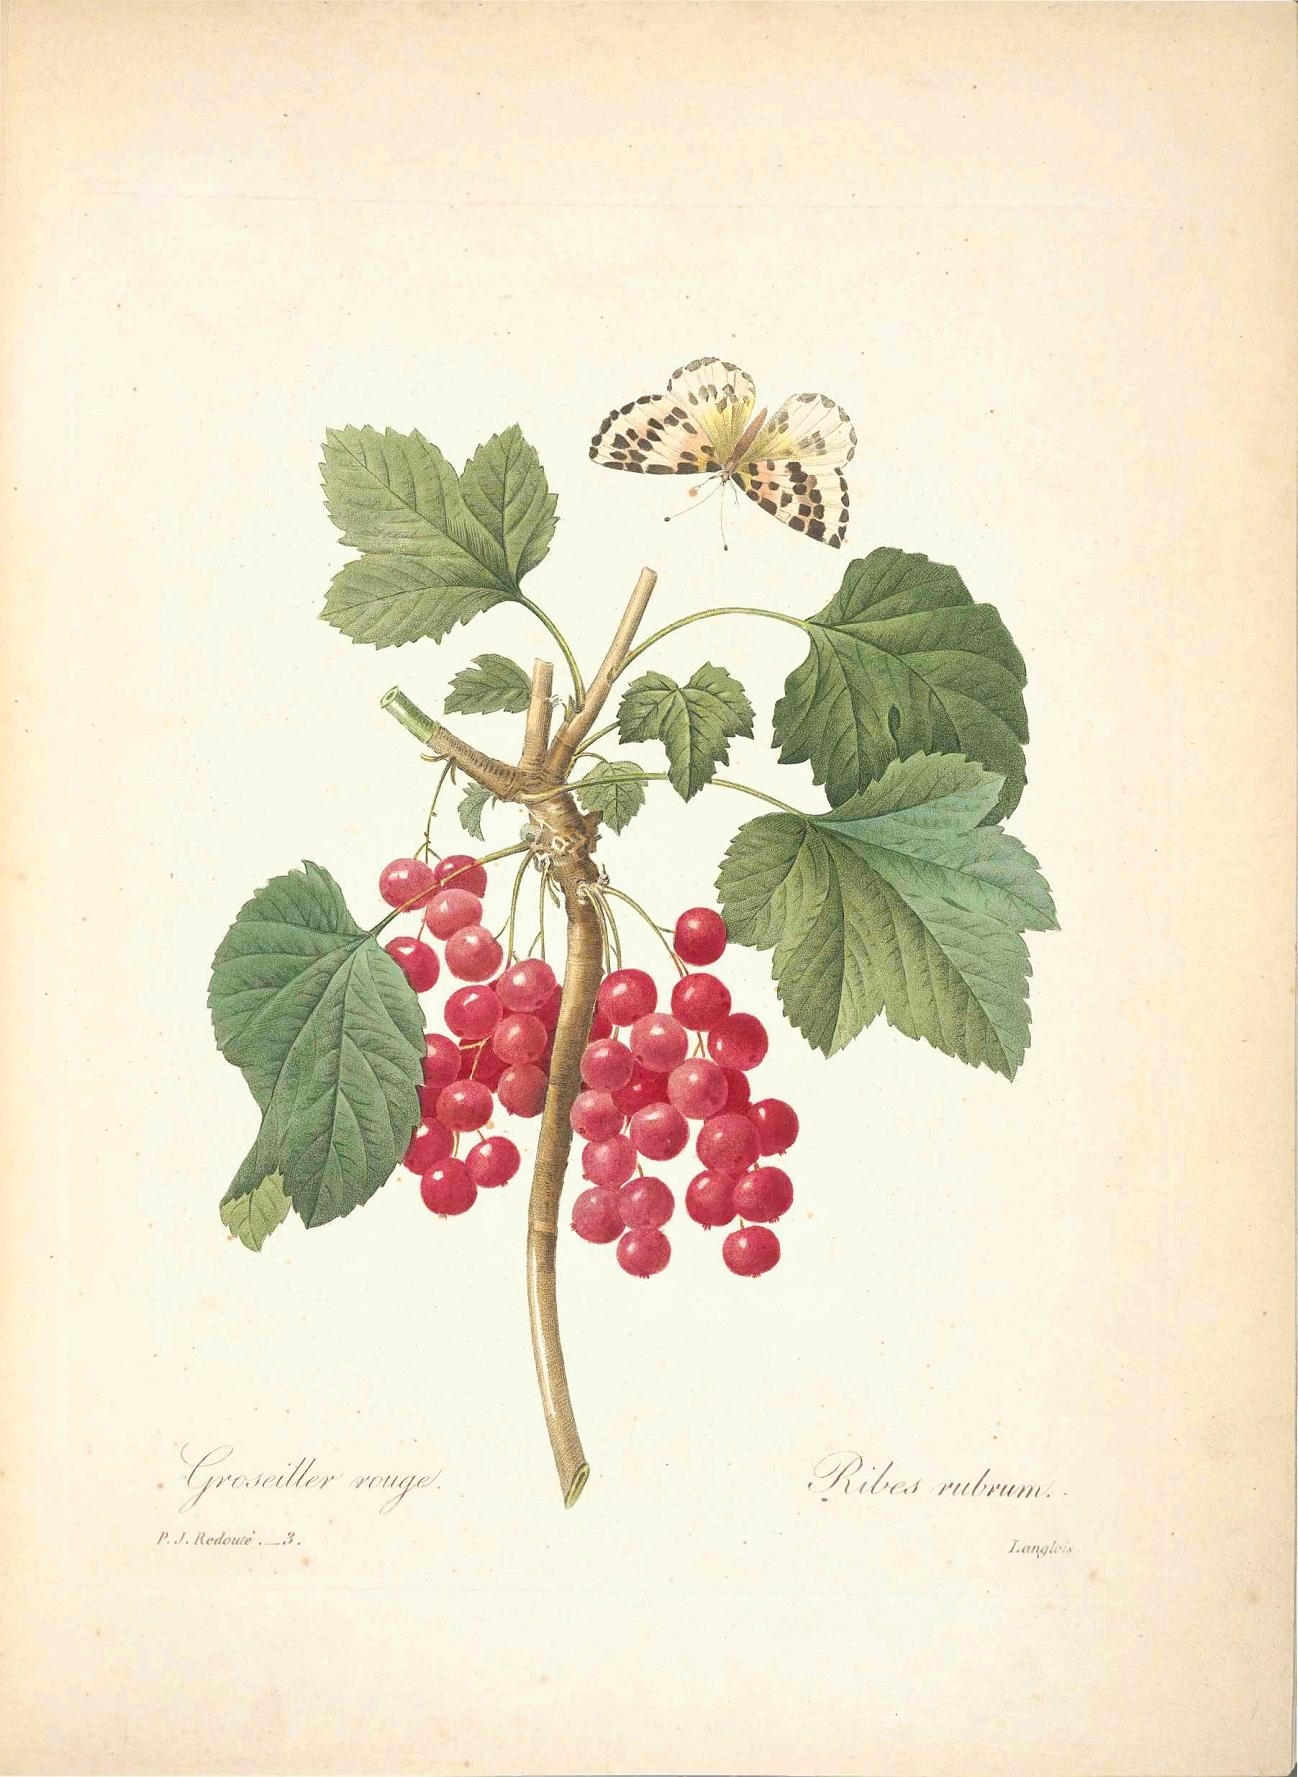 an antique illustration of a nch with flowers and a erfly